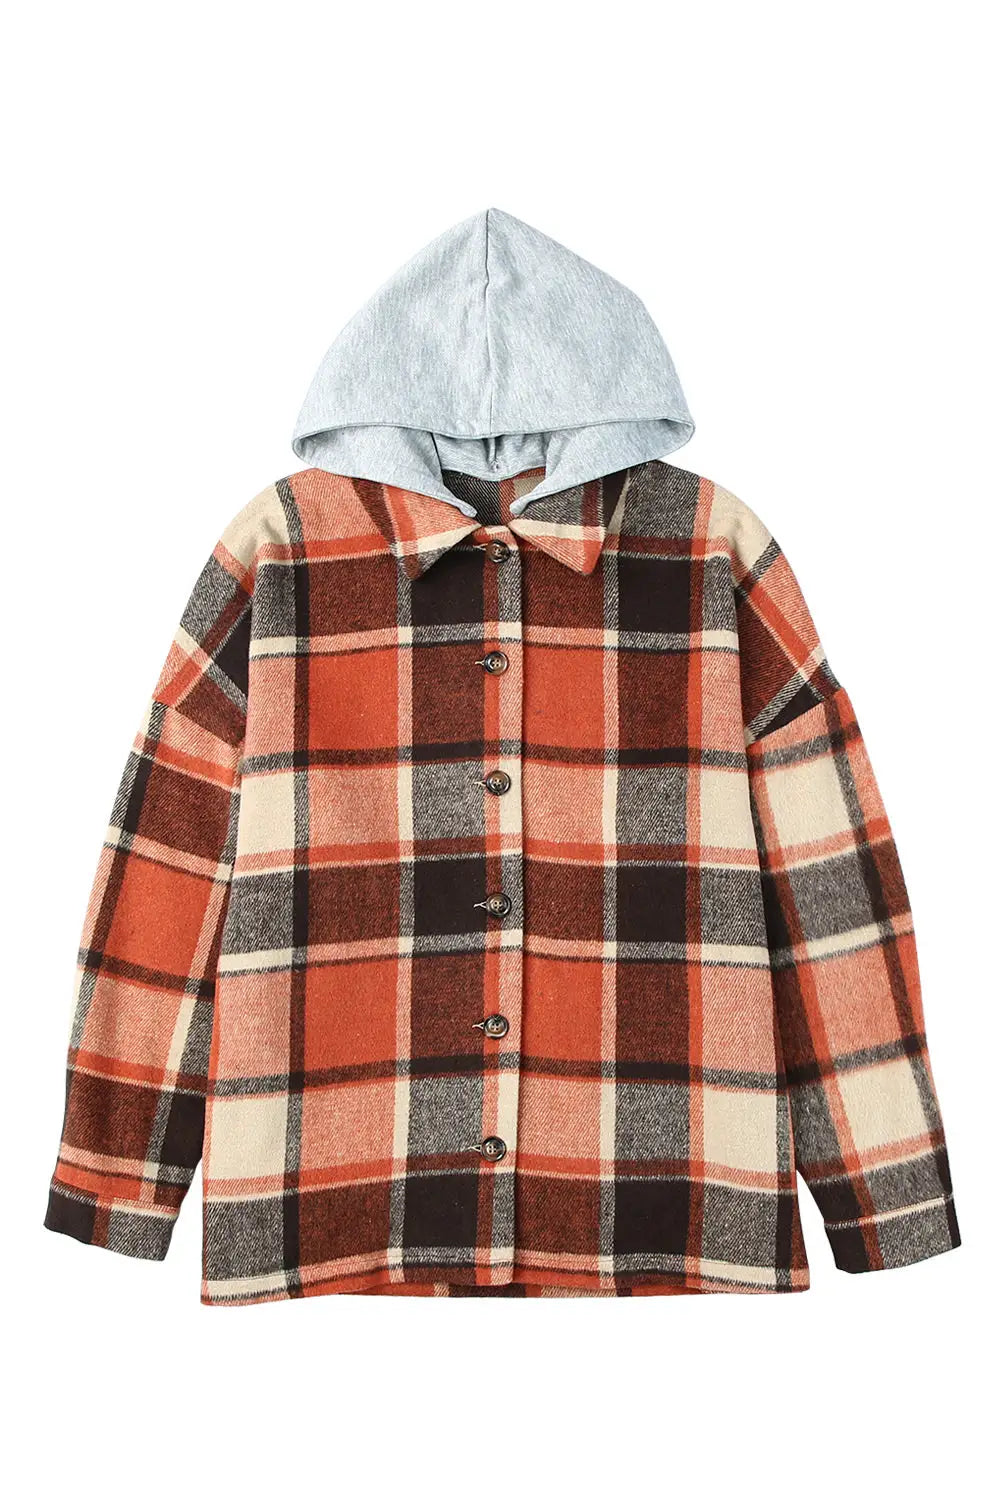 Orange hooded plaid button front shacket - shackets